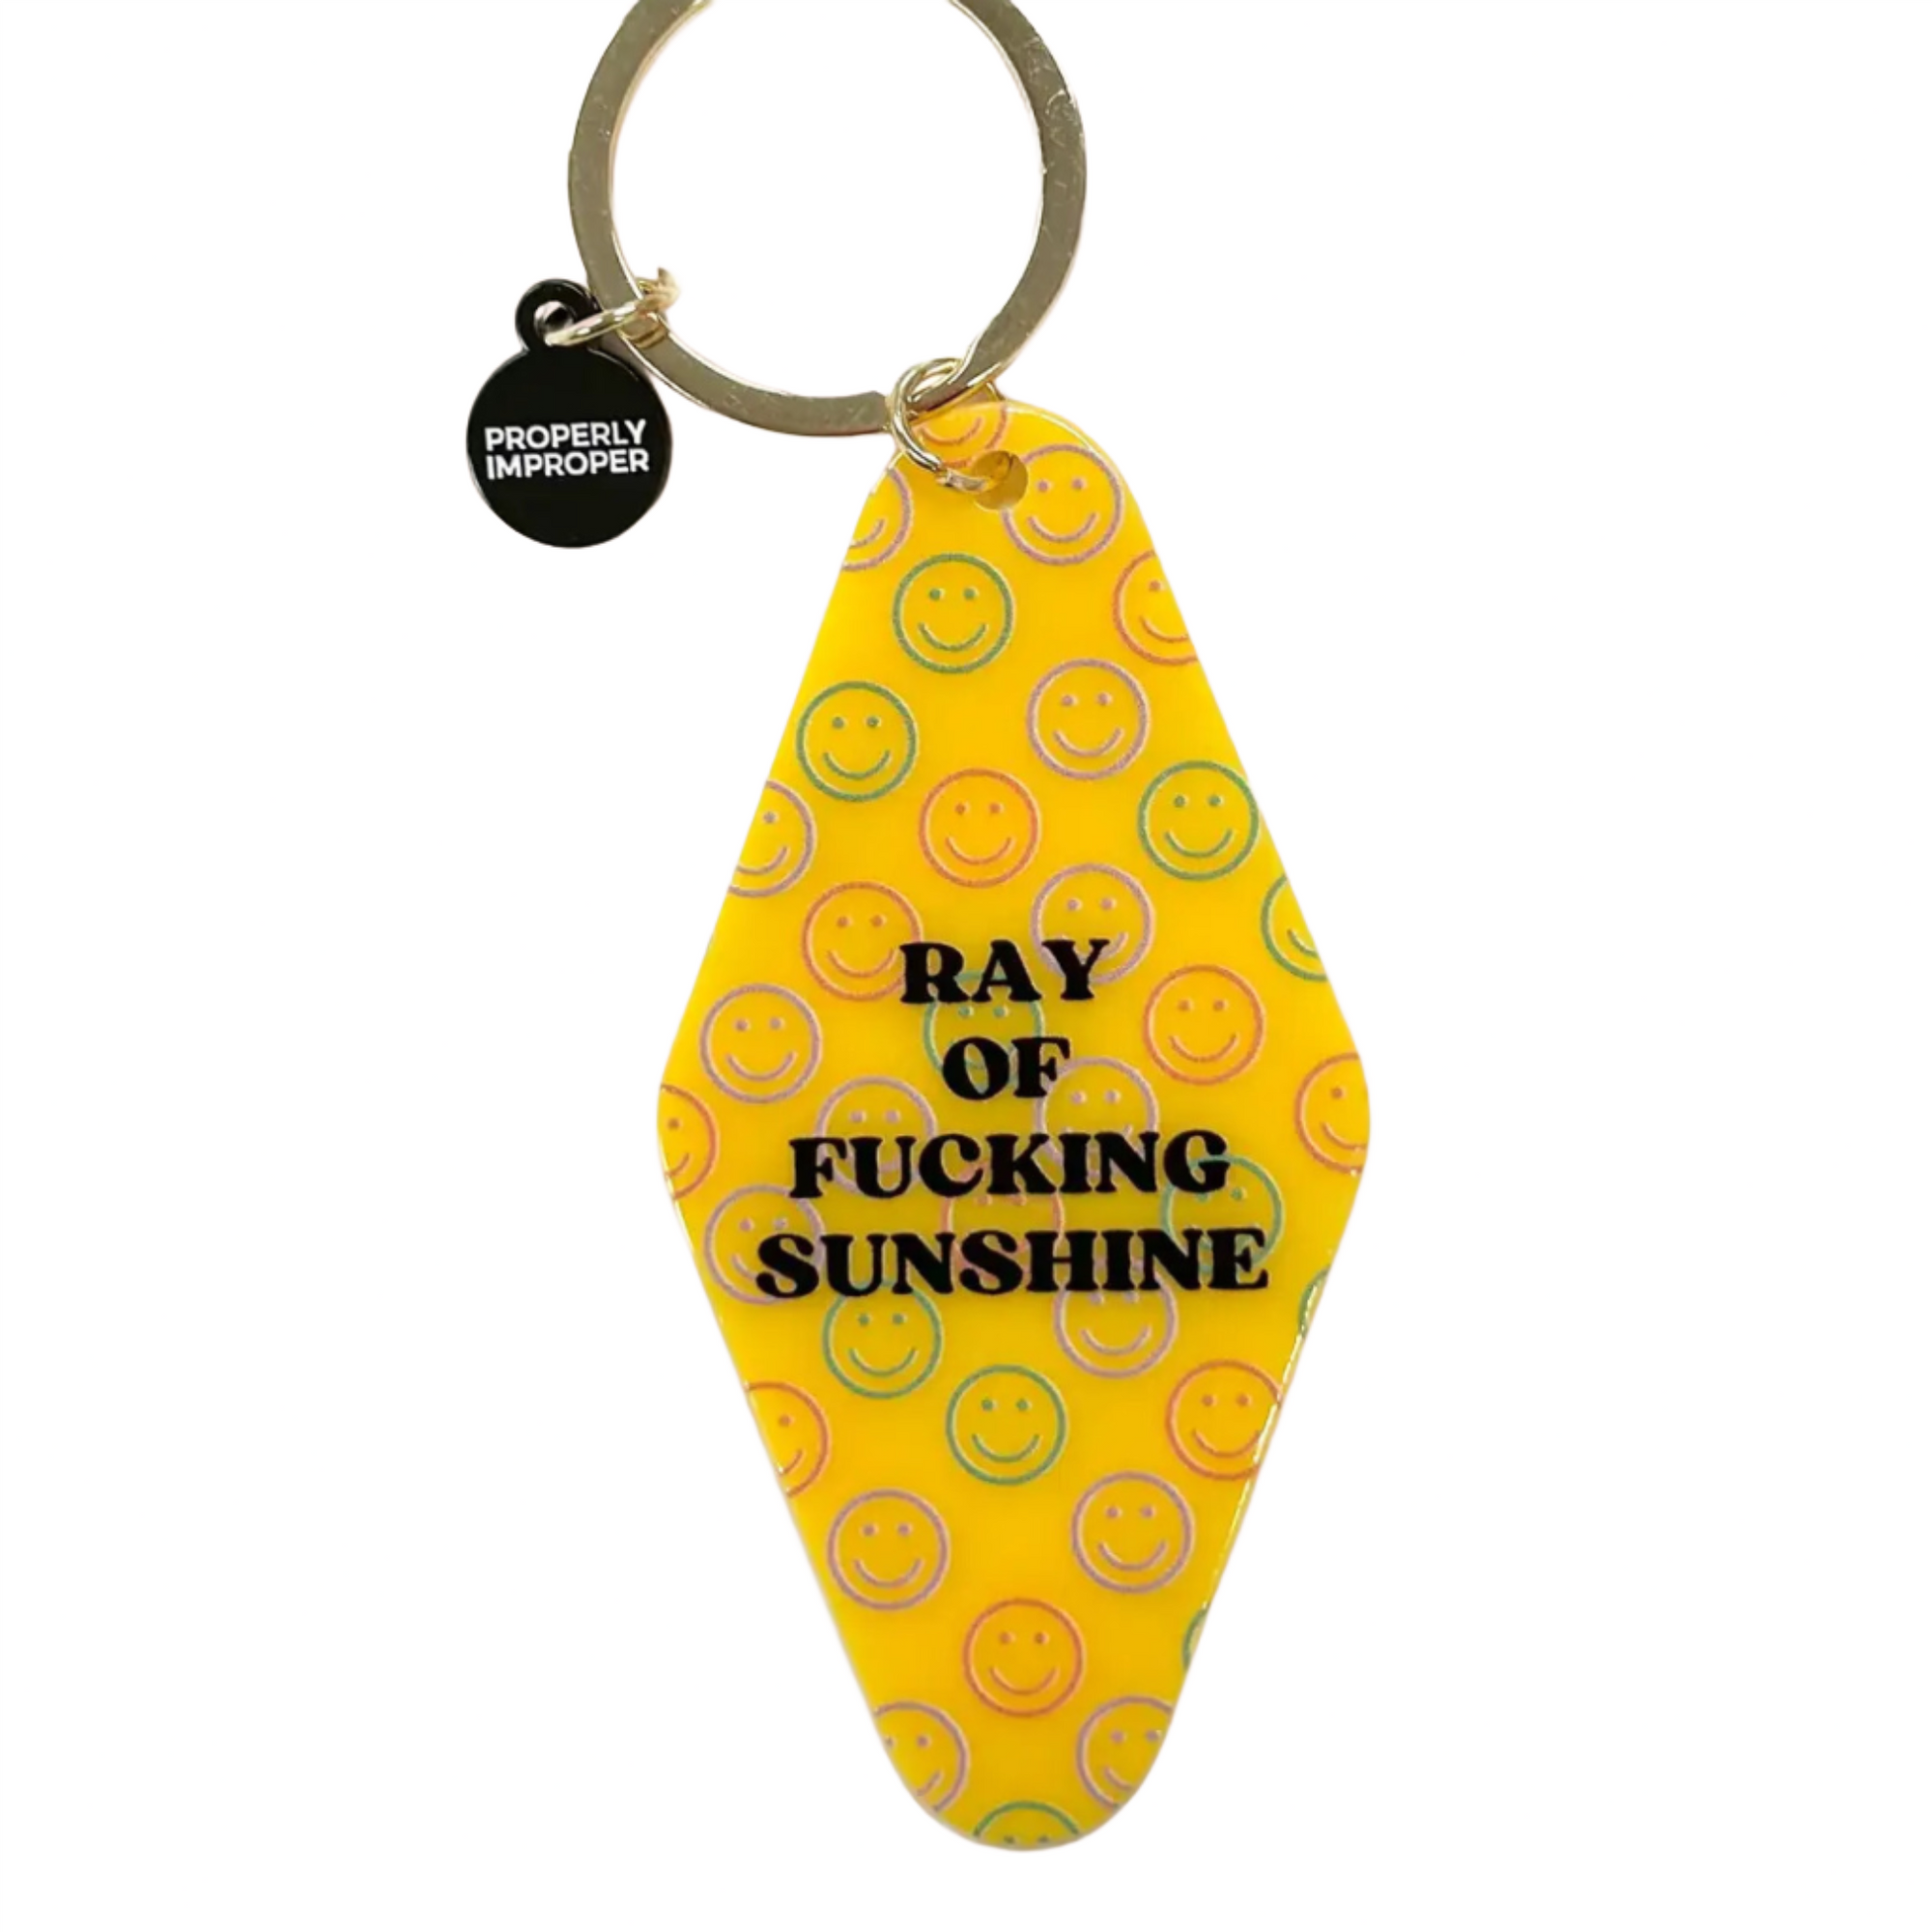 Ray of Fucking Sunshine W/ Smiley Faces Key Chain